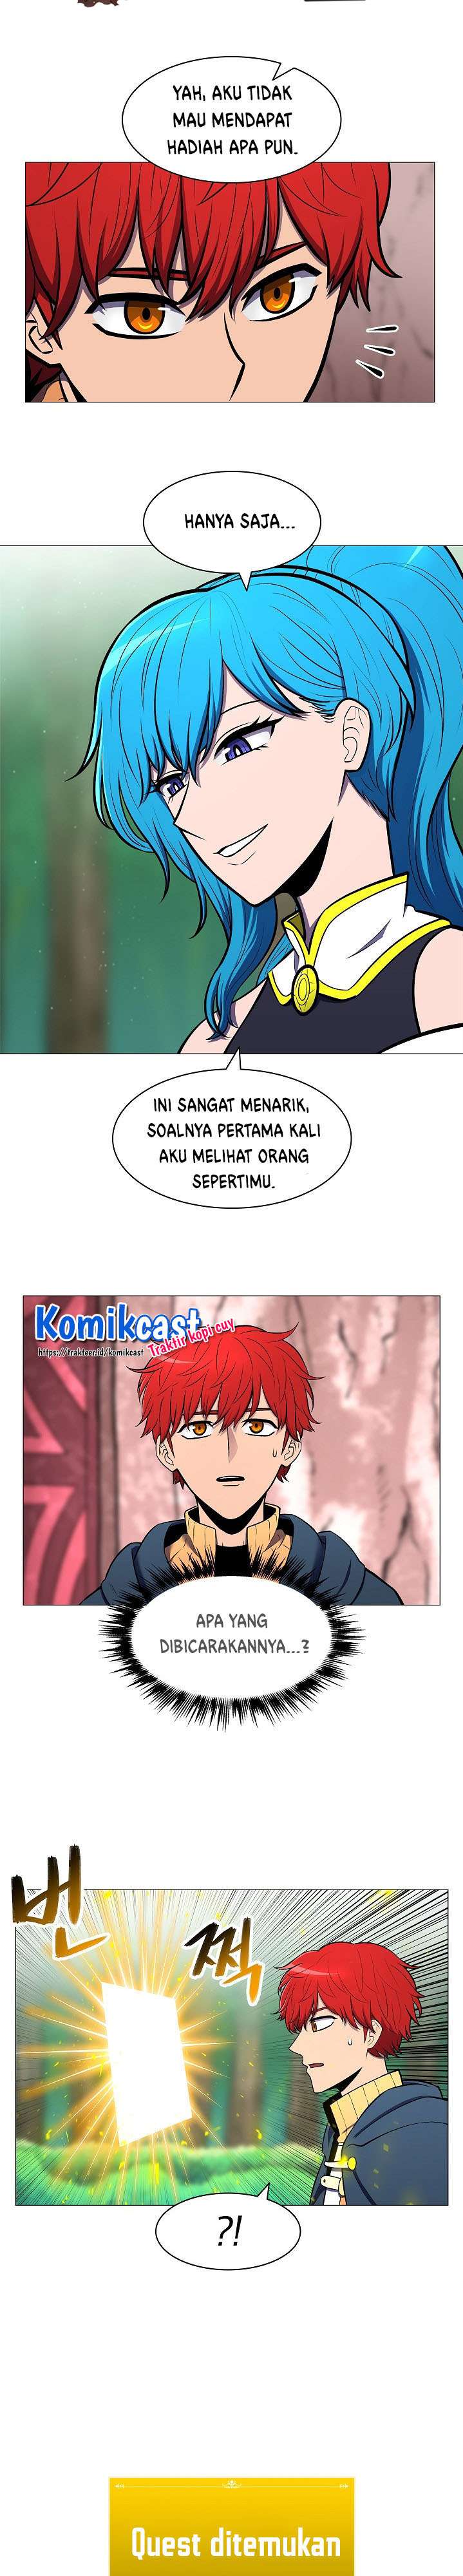 Updater Chapter 04